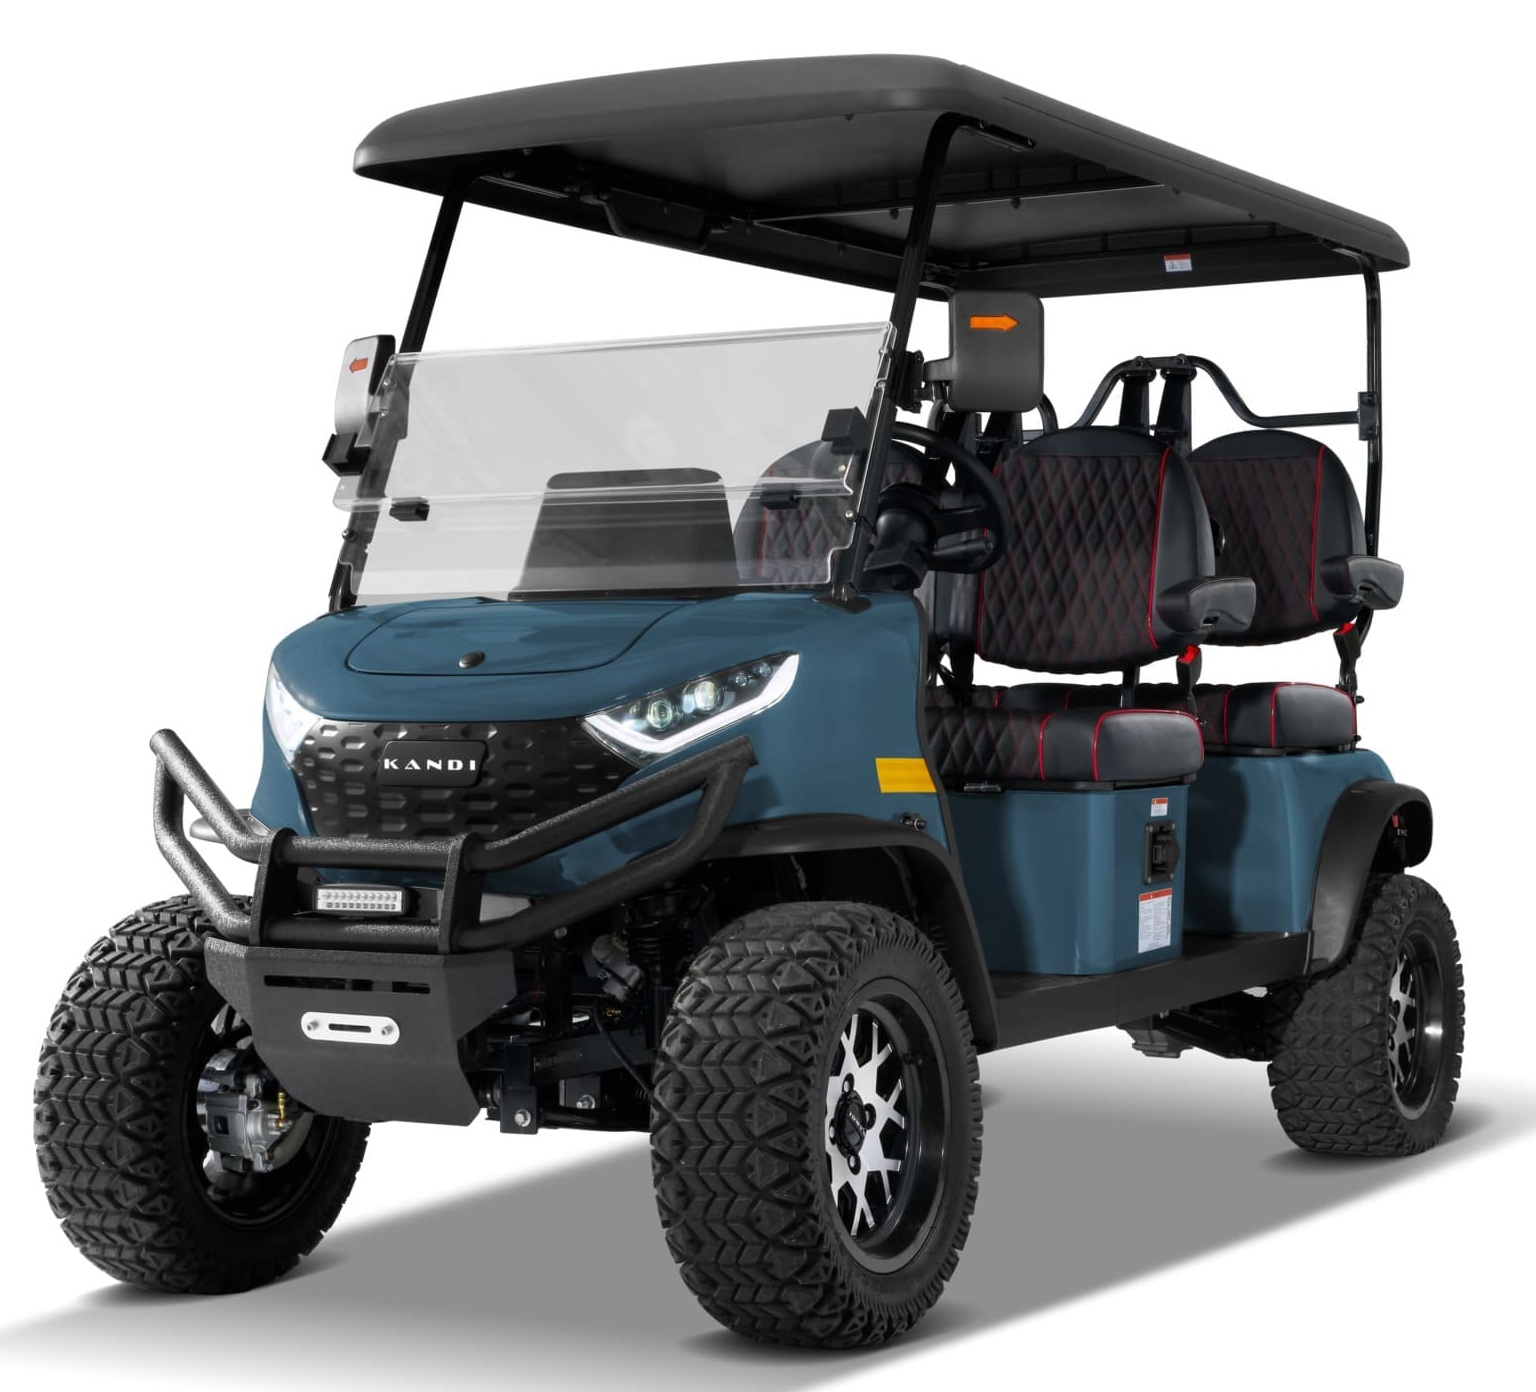 Kandi Kruiser 4PRO Forward B Electric 4-Seater Golf Cart with AC Electric Motor, Lithium 48V 150Ah Battery, and Air Cooling System